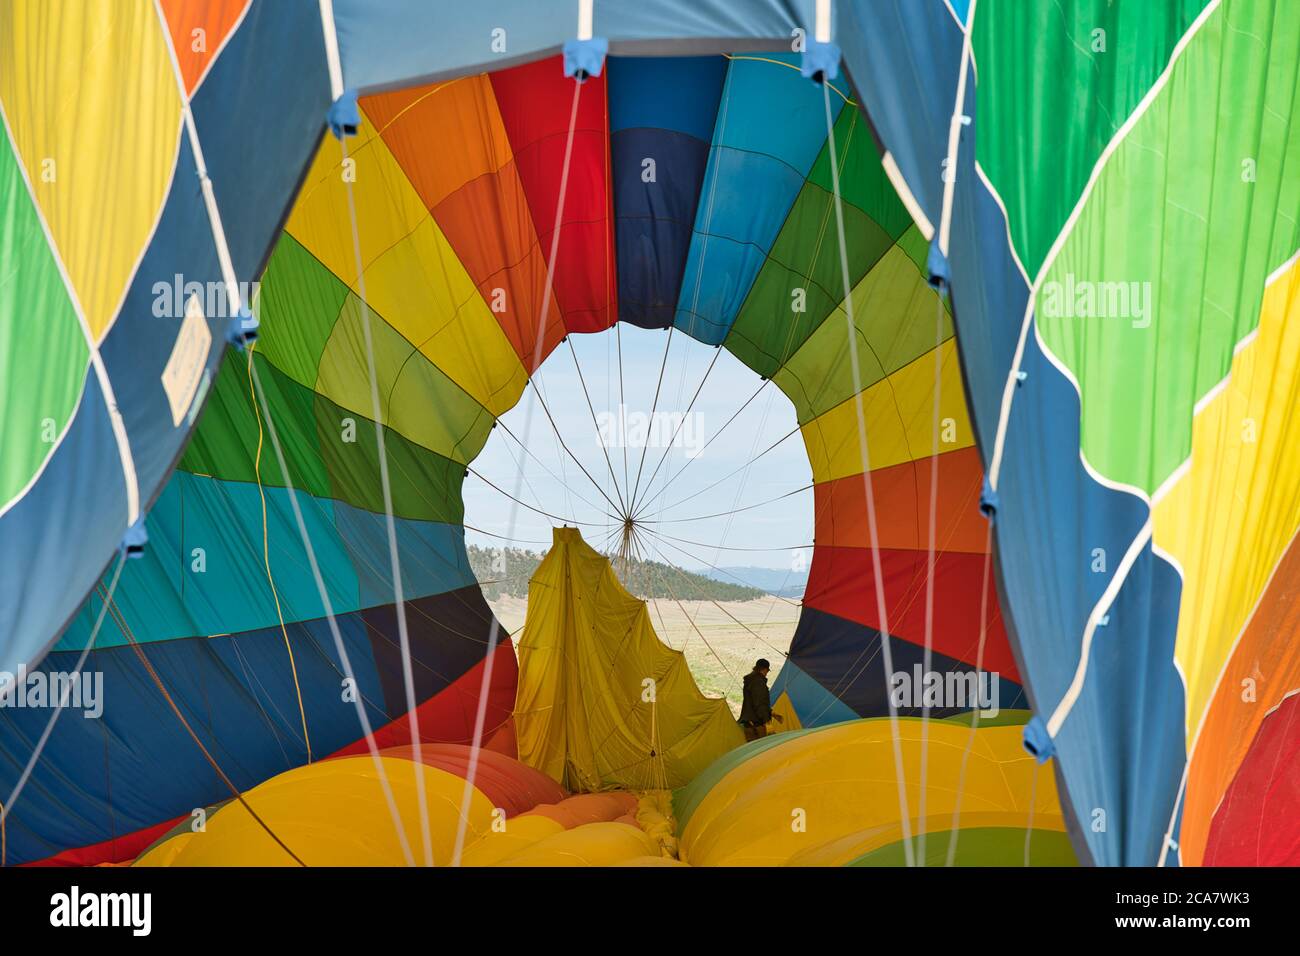 Man standing inside deflating hot air balloon. Showcasing the immense size of the balloon. Stock Photo